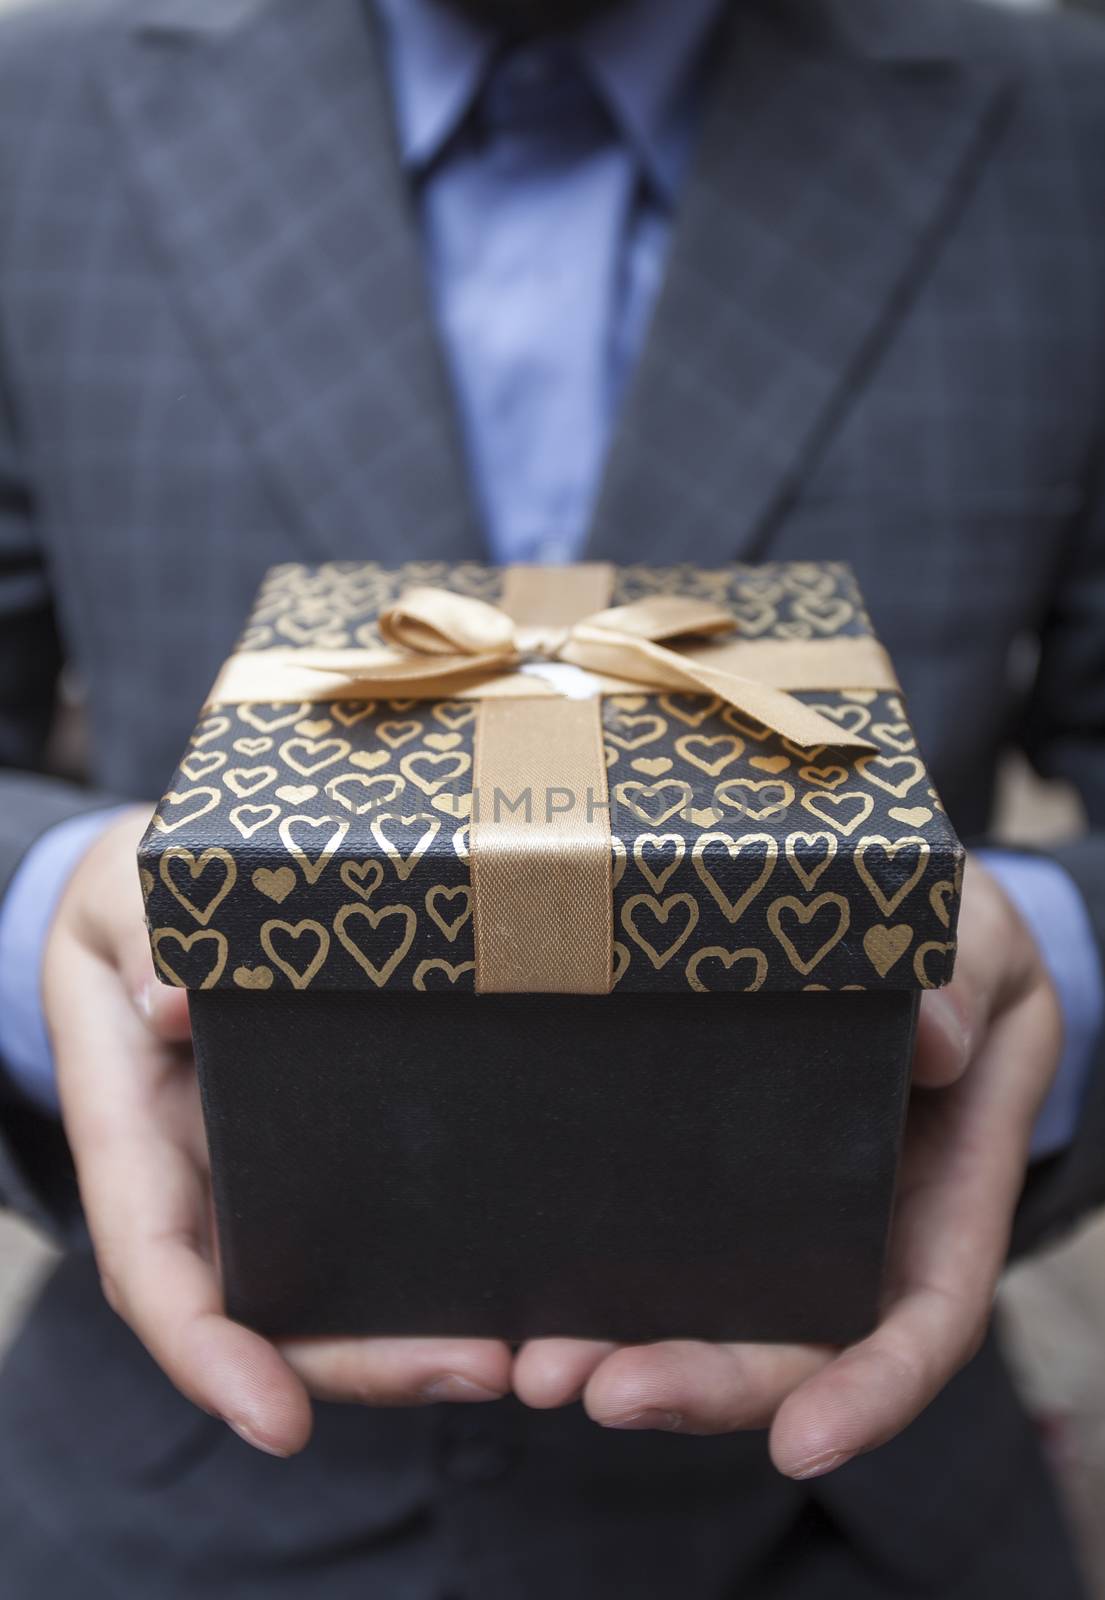 Man's hands keep a box in a business suit wrapped up by a bow